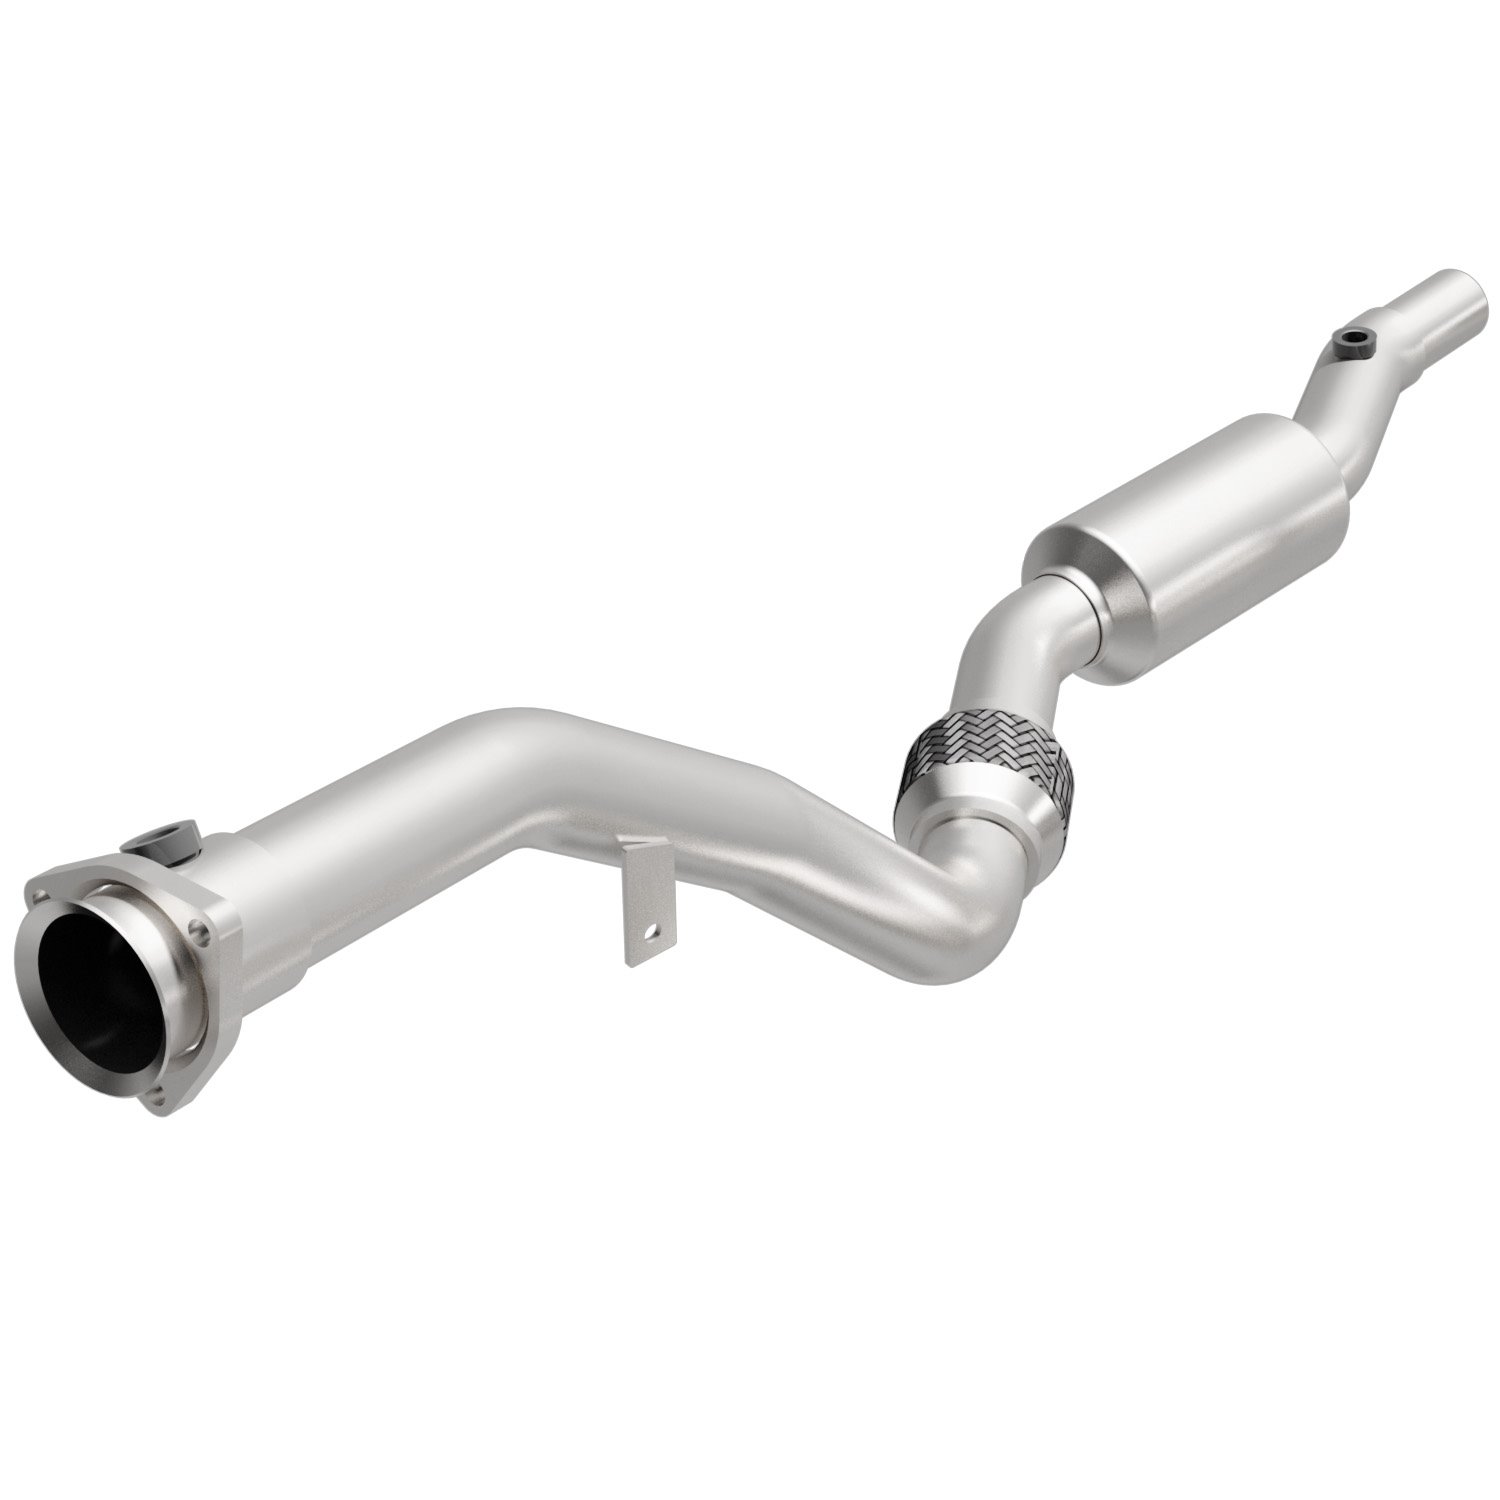 HM Grade Federal / EPA Compliant Direct-Fit Catalytic Converter 24062